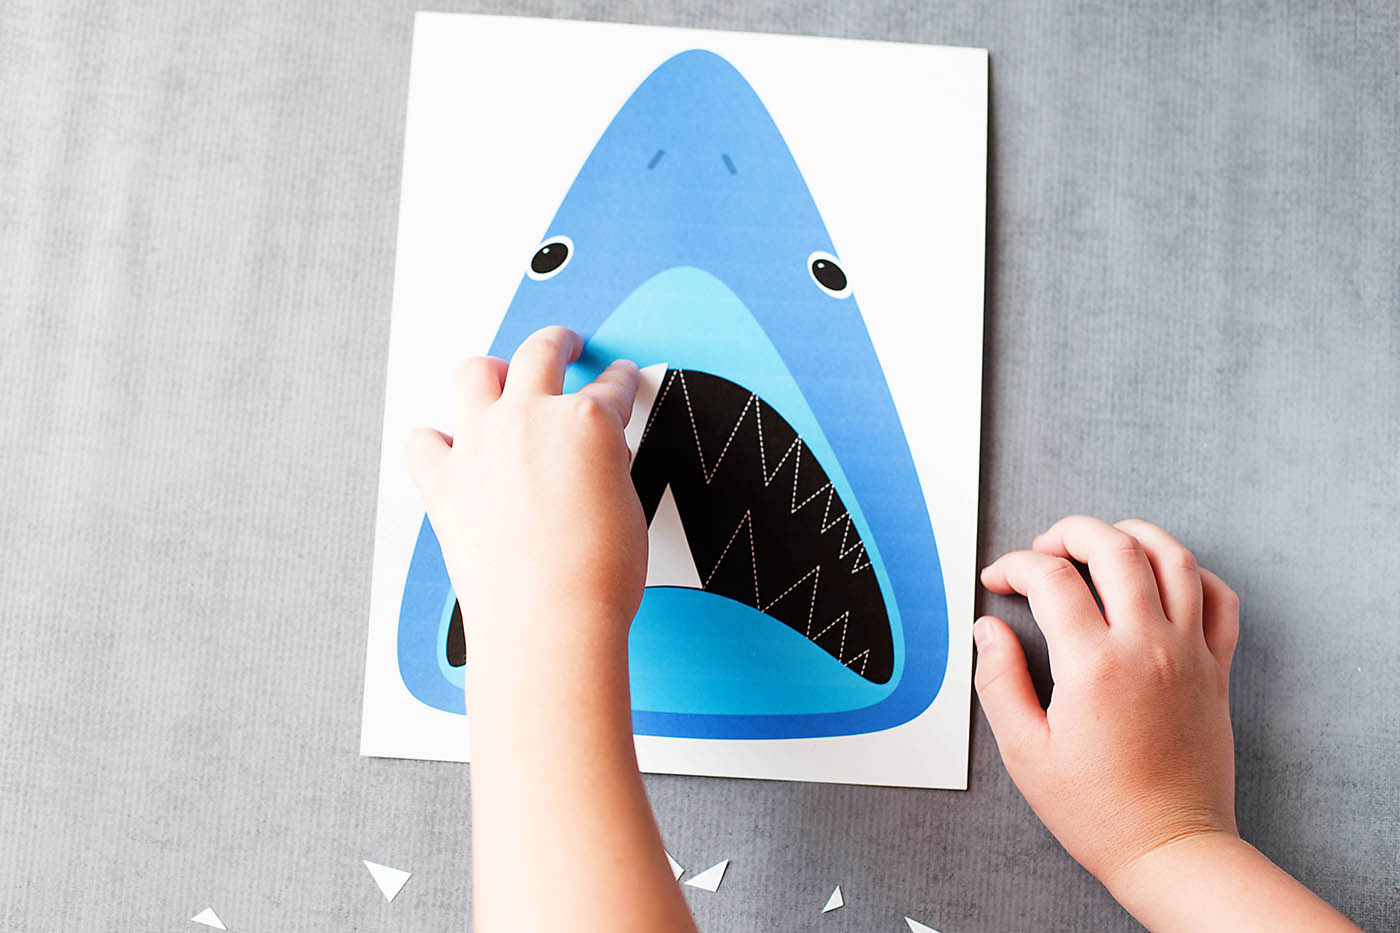 Printable shark tooth puzzle game, fun for a shark party or just an every day boredom buster